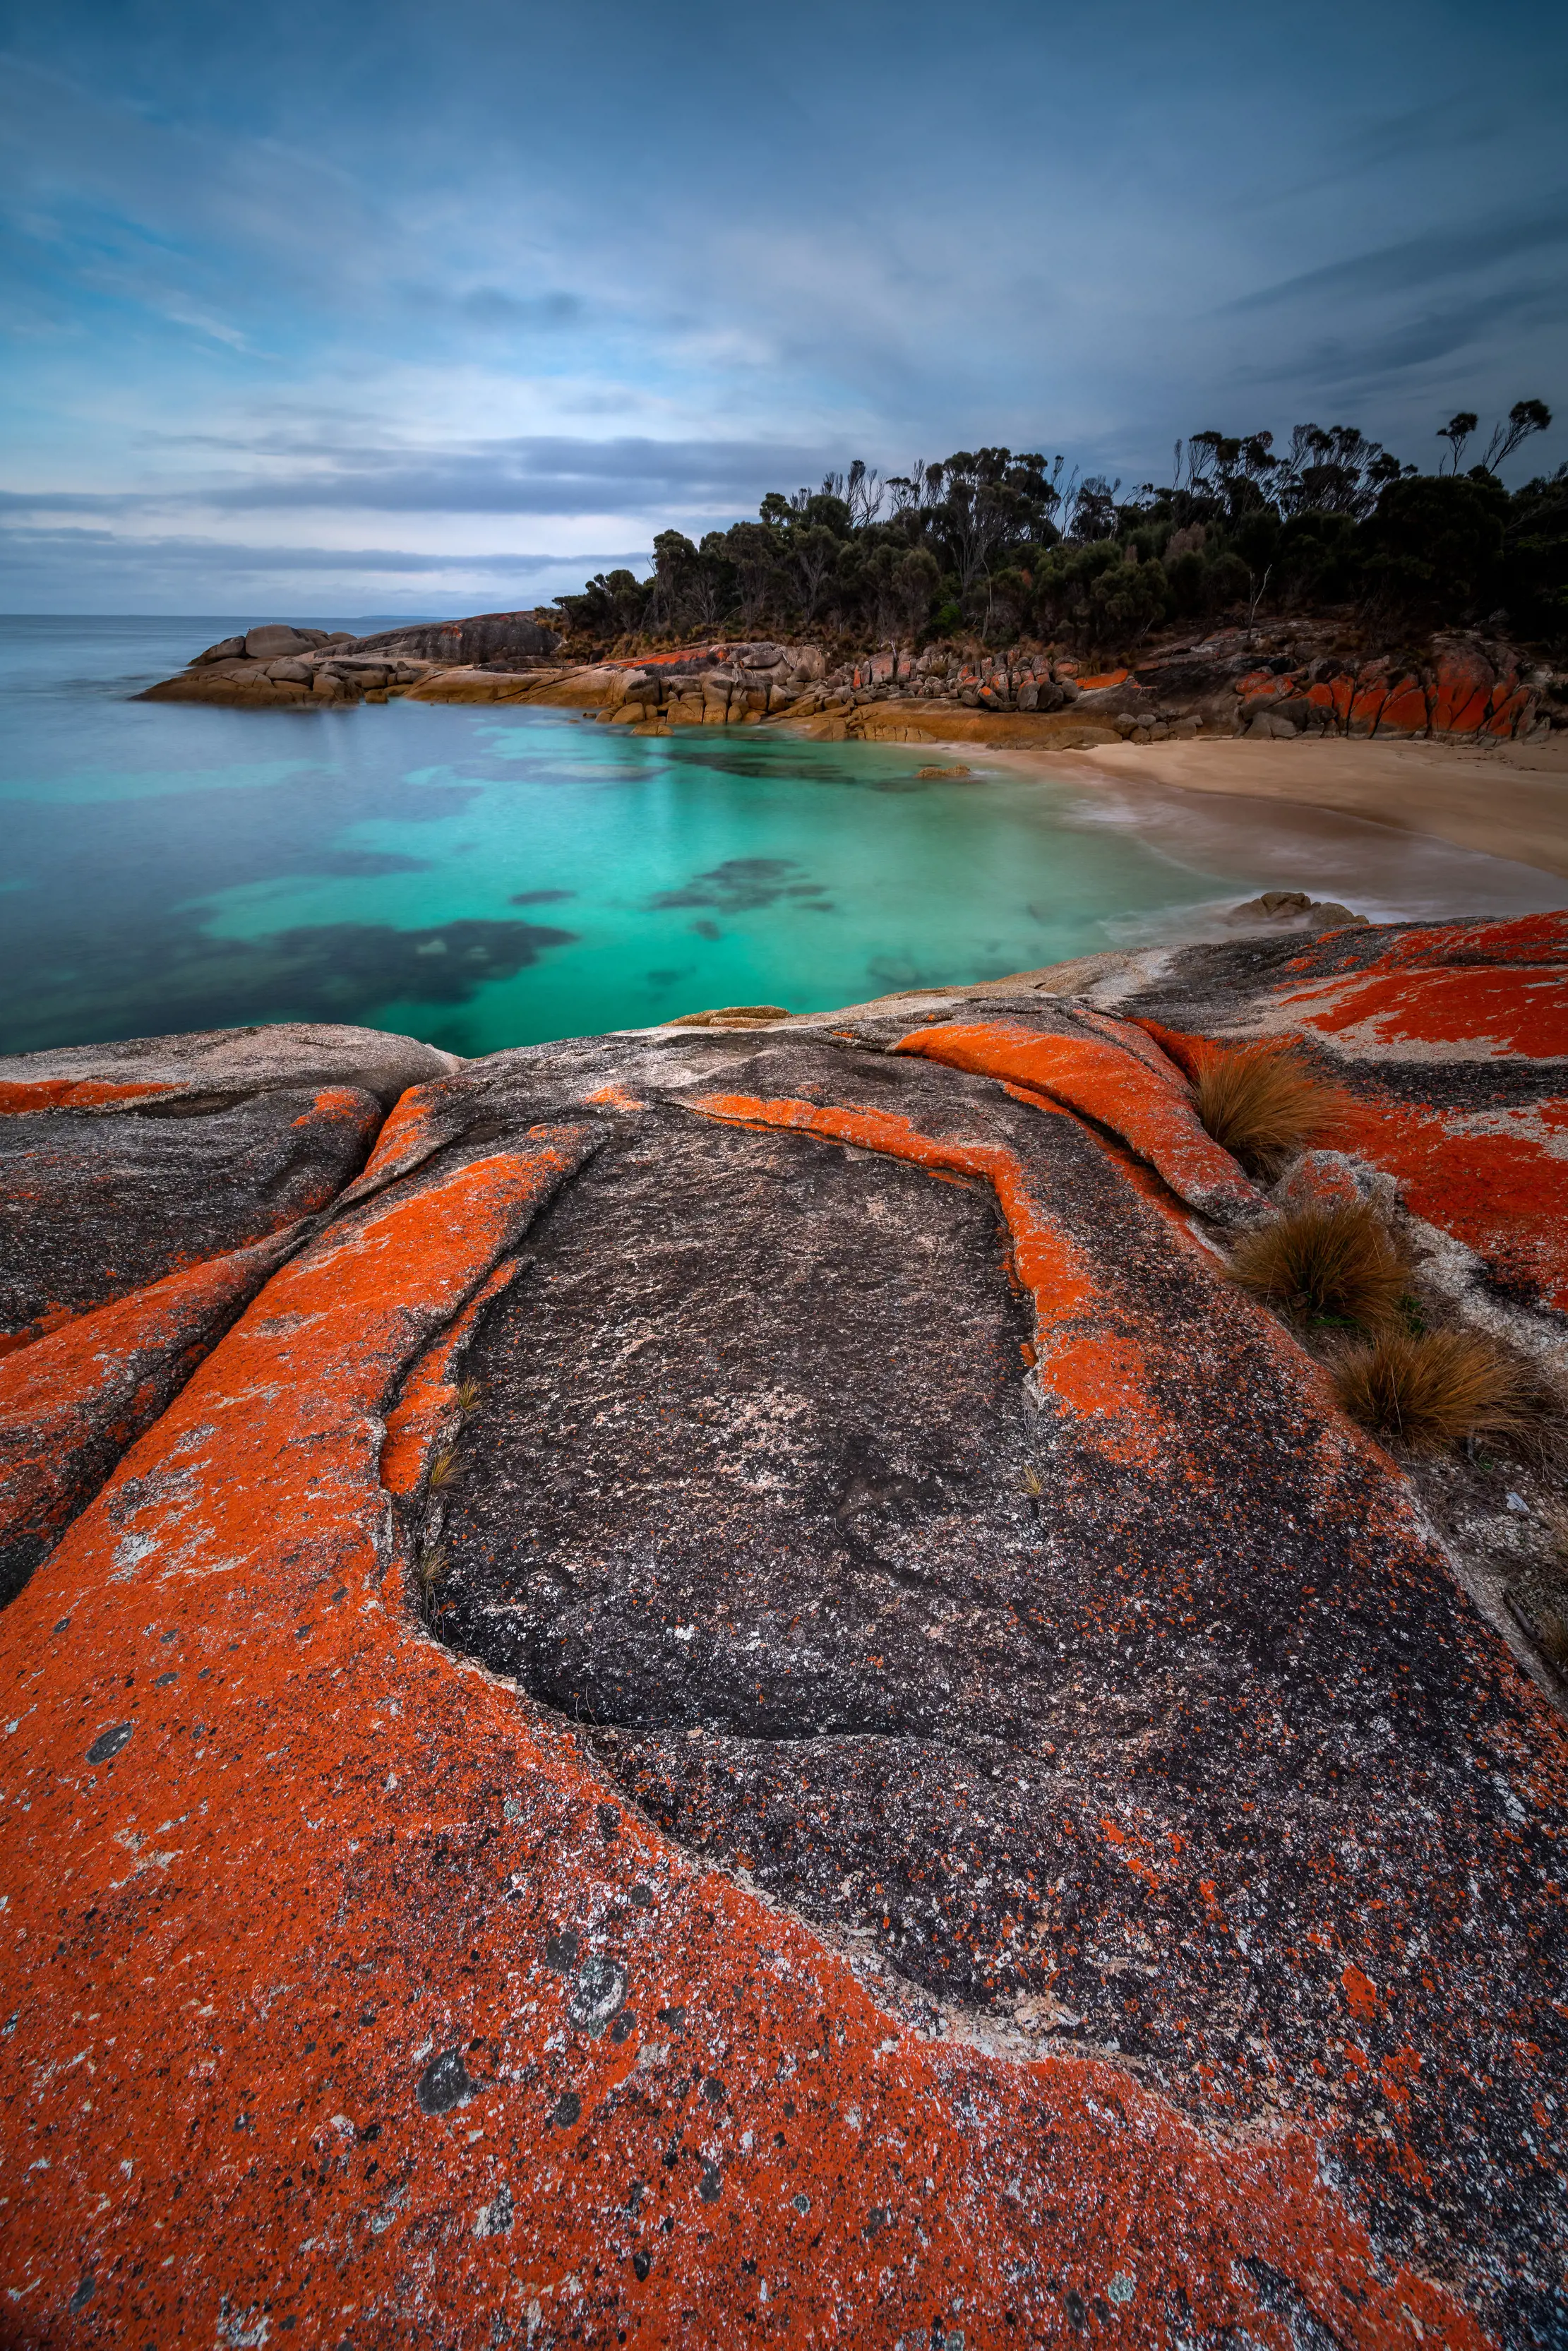 Incredible and vibrant image of Trousers Point, Flinders Island, showcasing it's striking blue ocean and bright orange rocks.